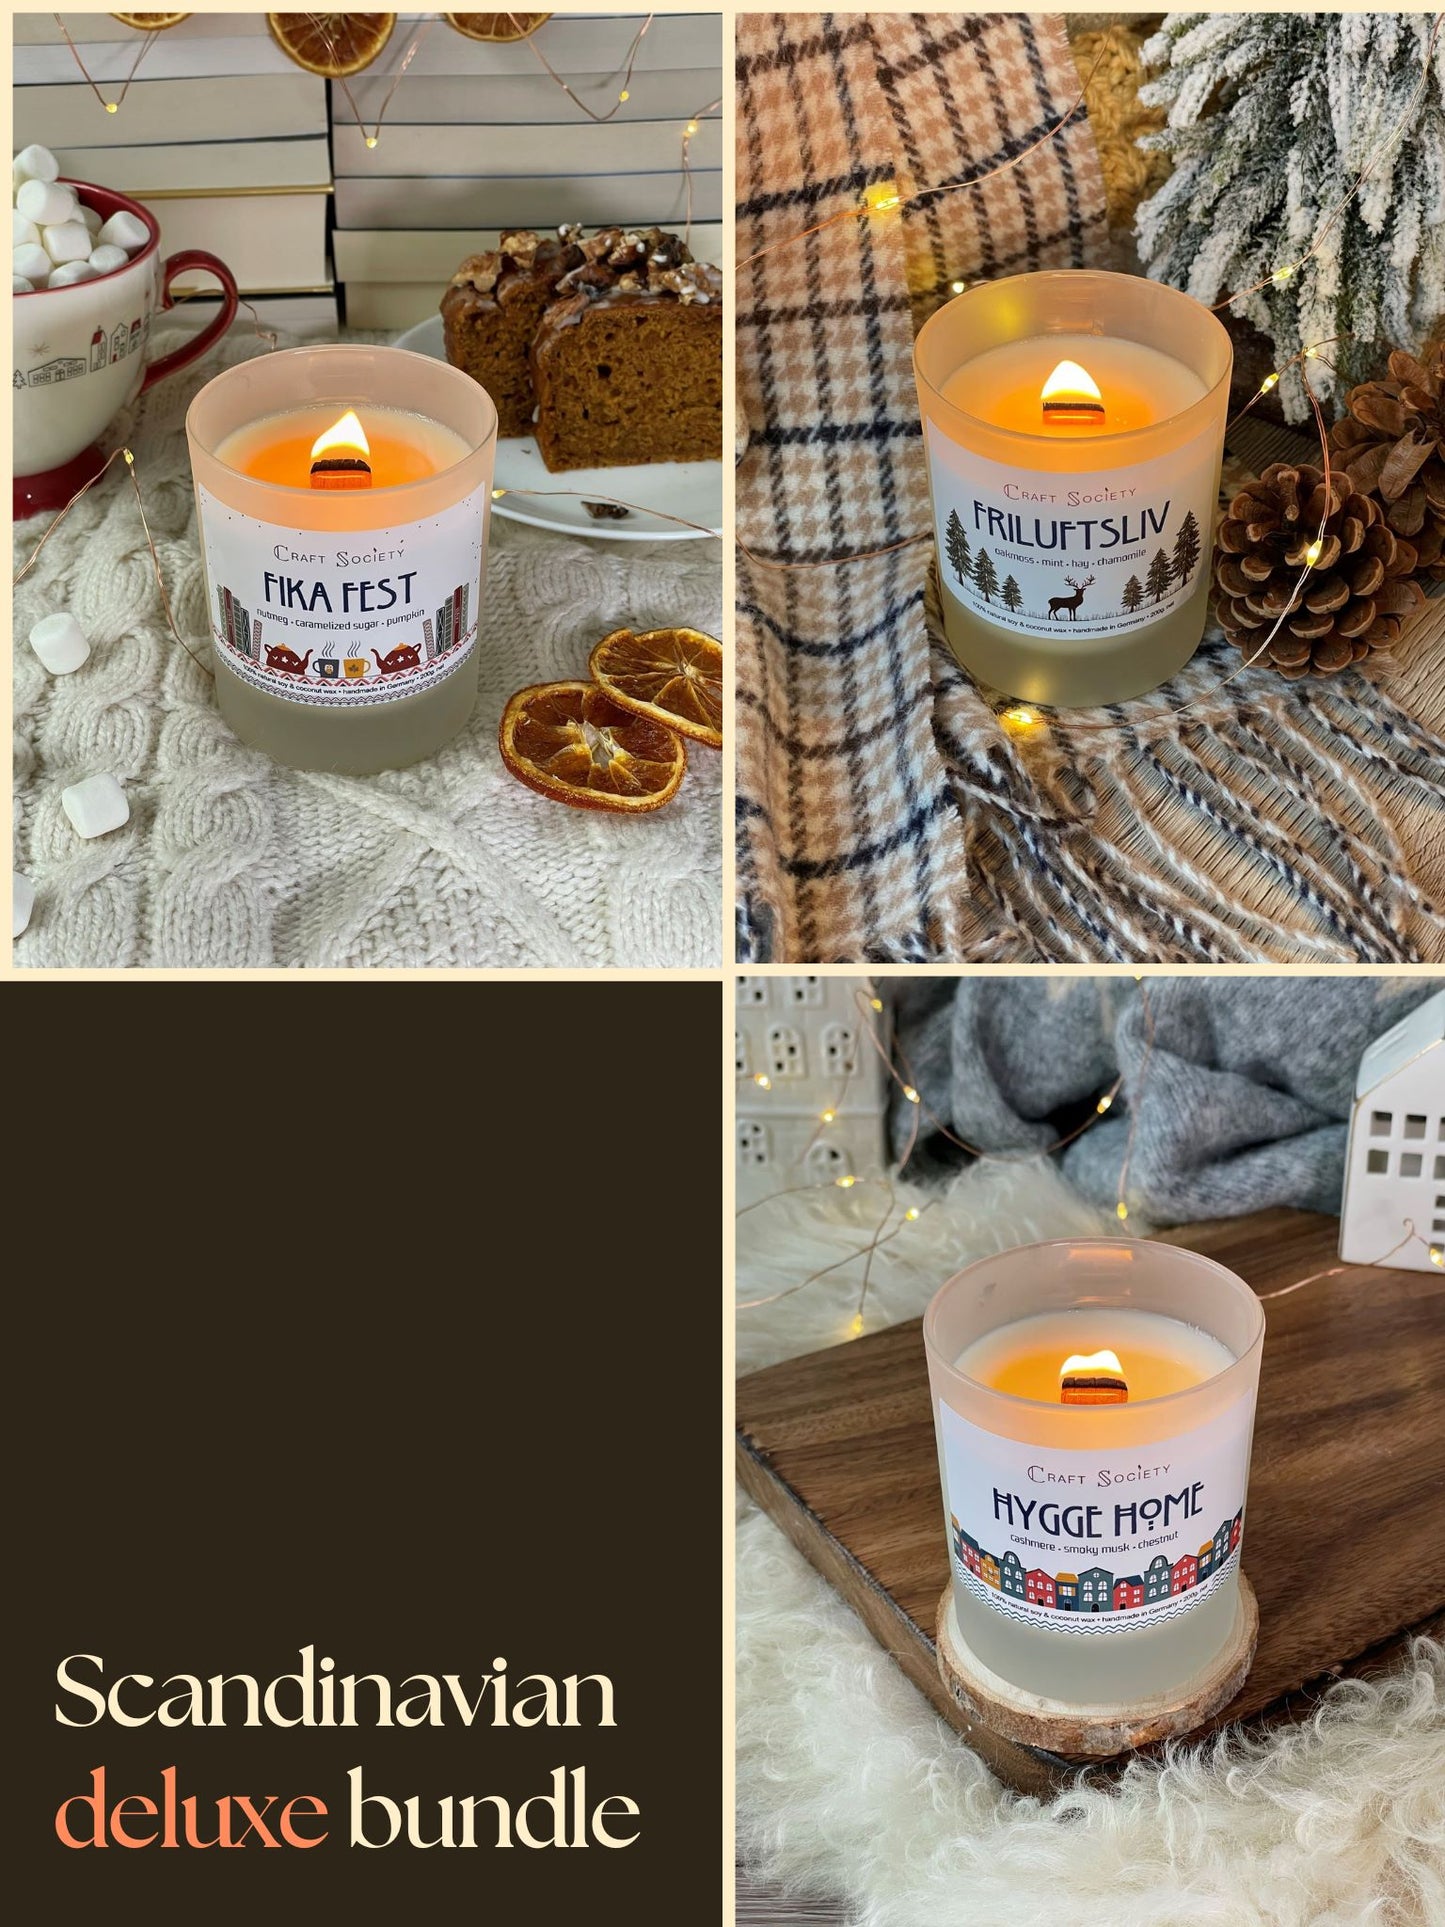 A bundle of three deluxe scented candles, all lit, on a decorated background, scandinavian theme